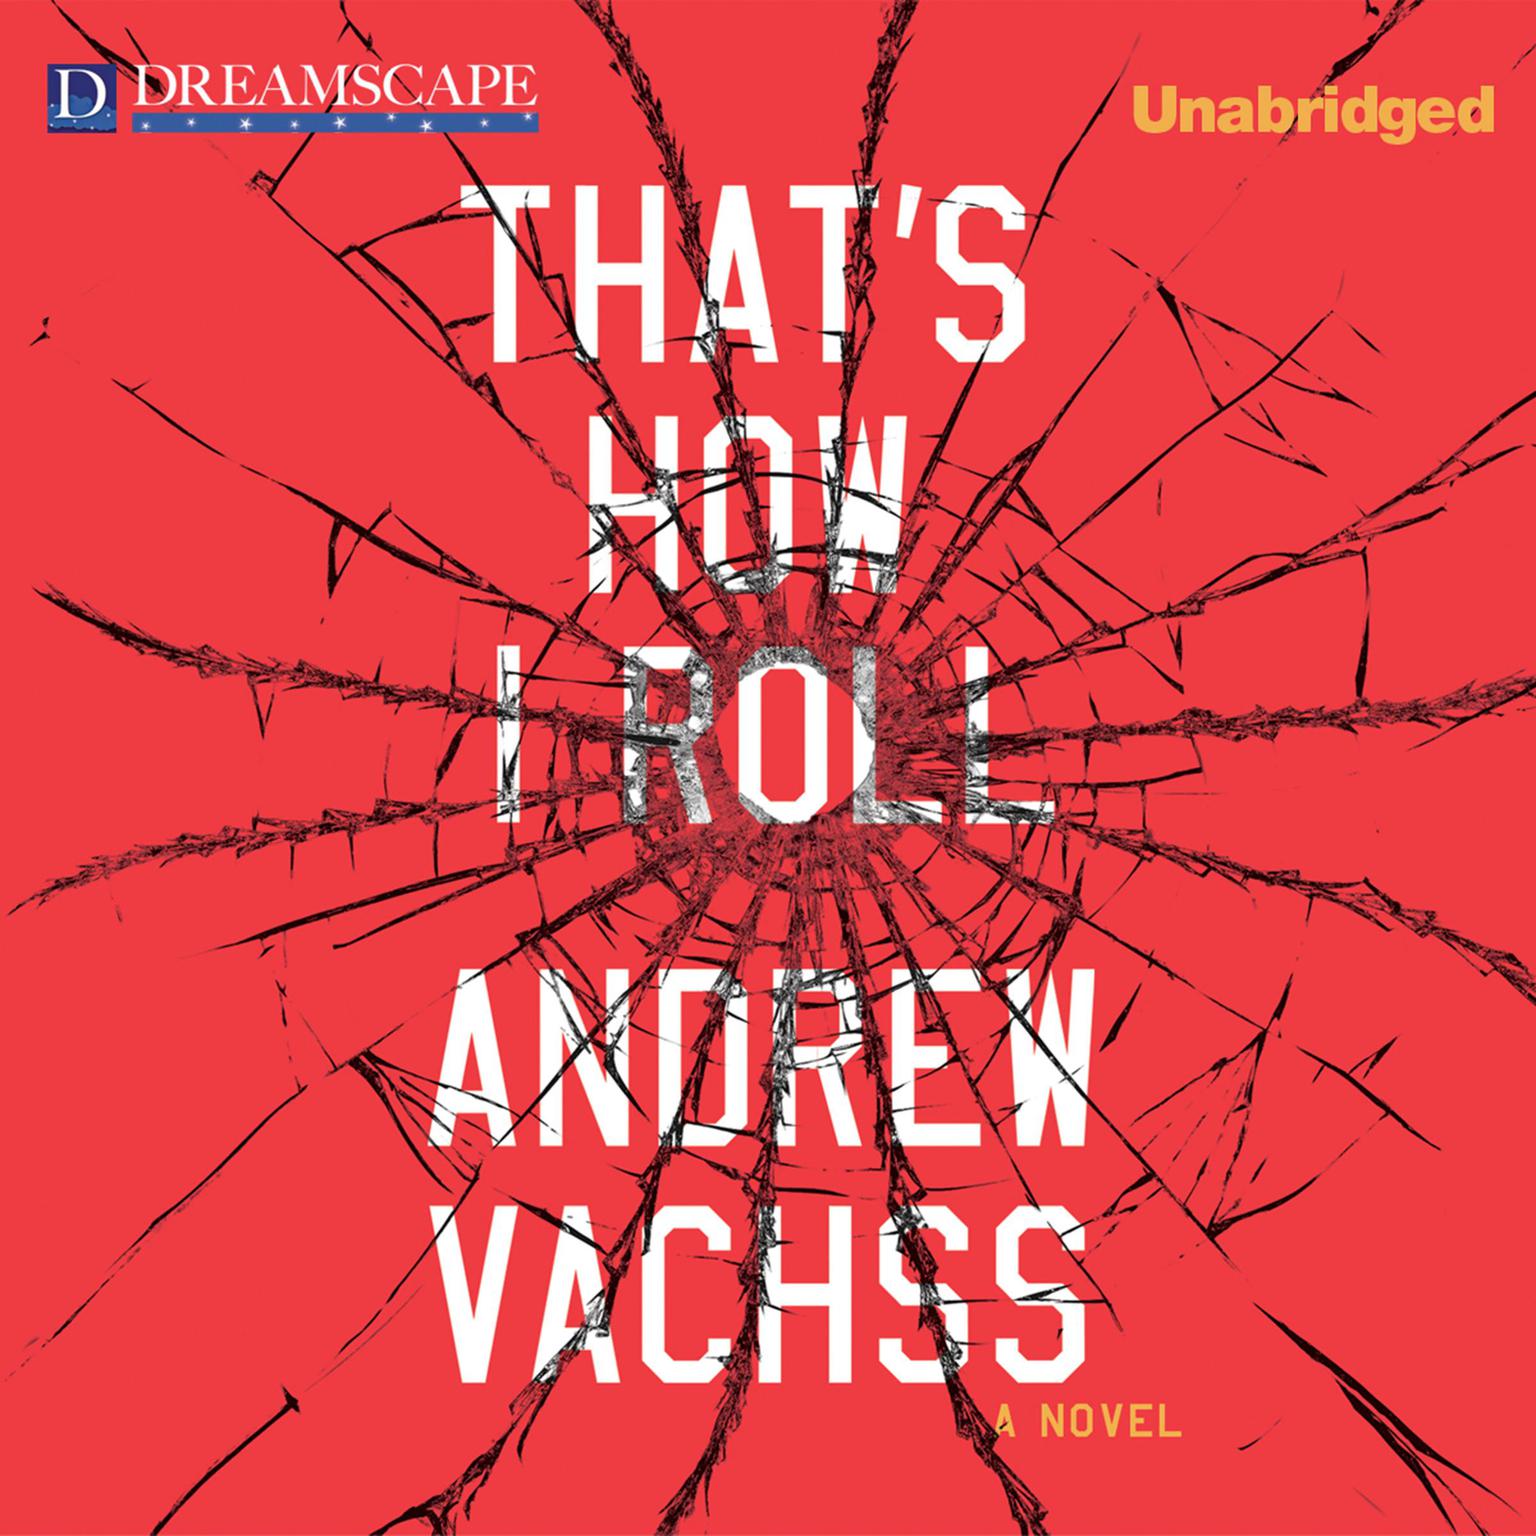 Thats How I Roll Audiobook, by Andrew Vachss